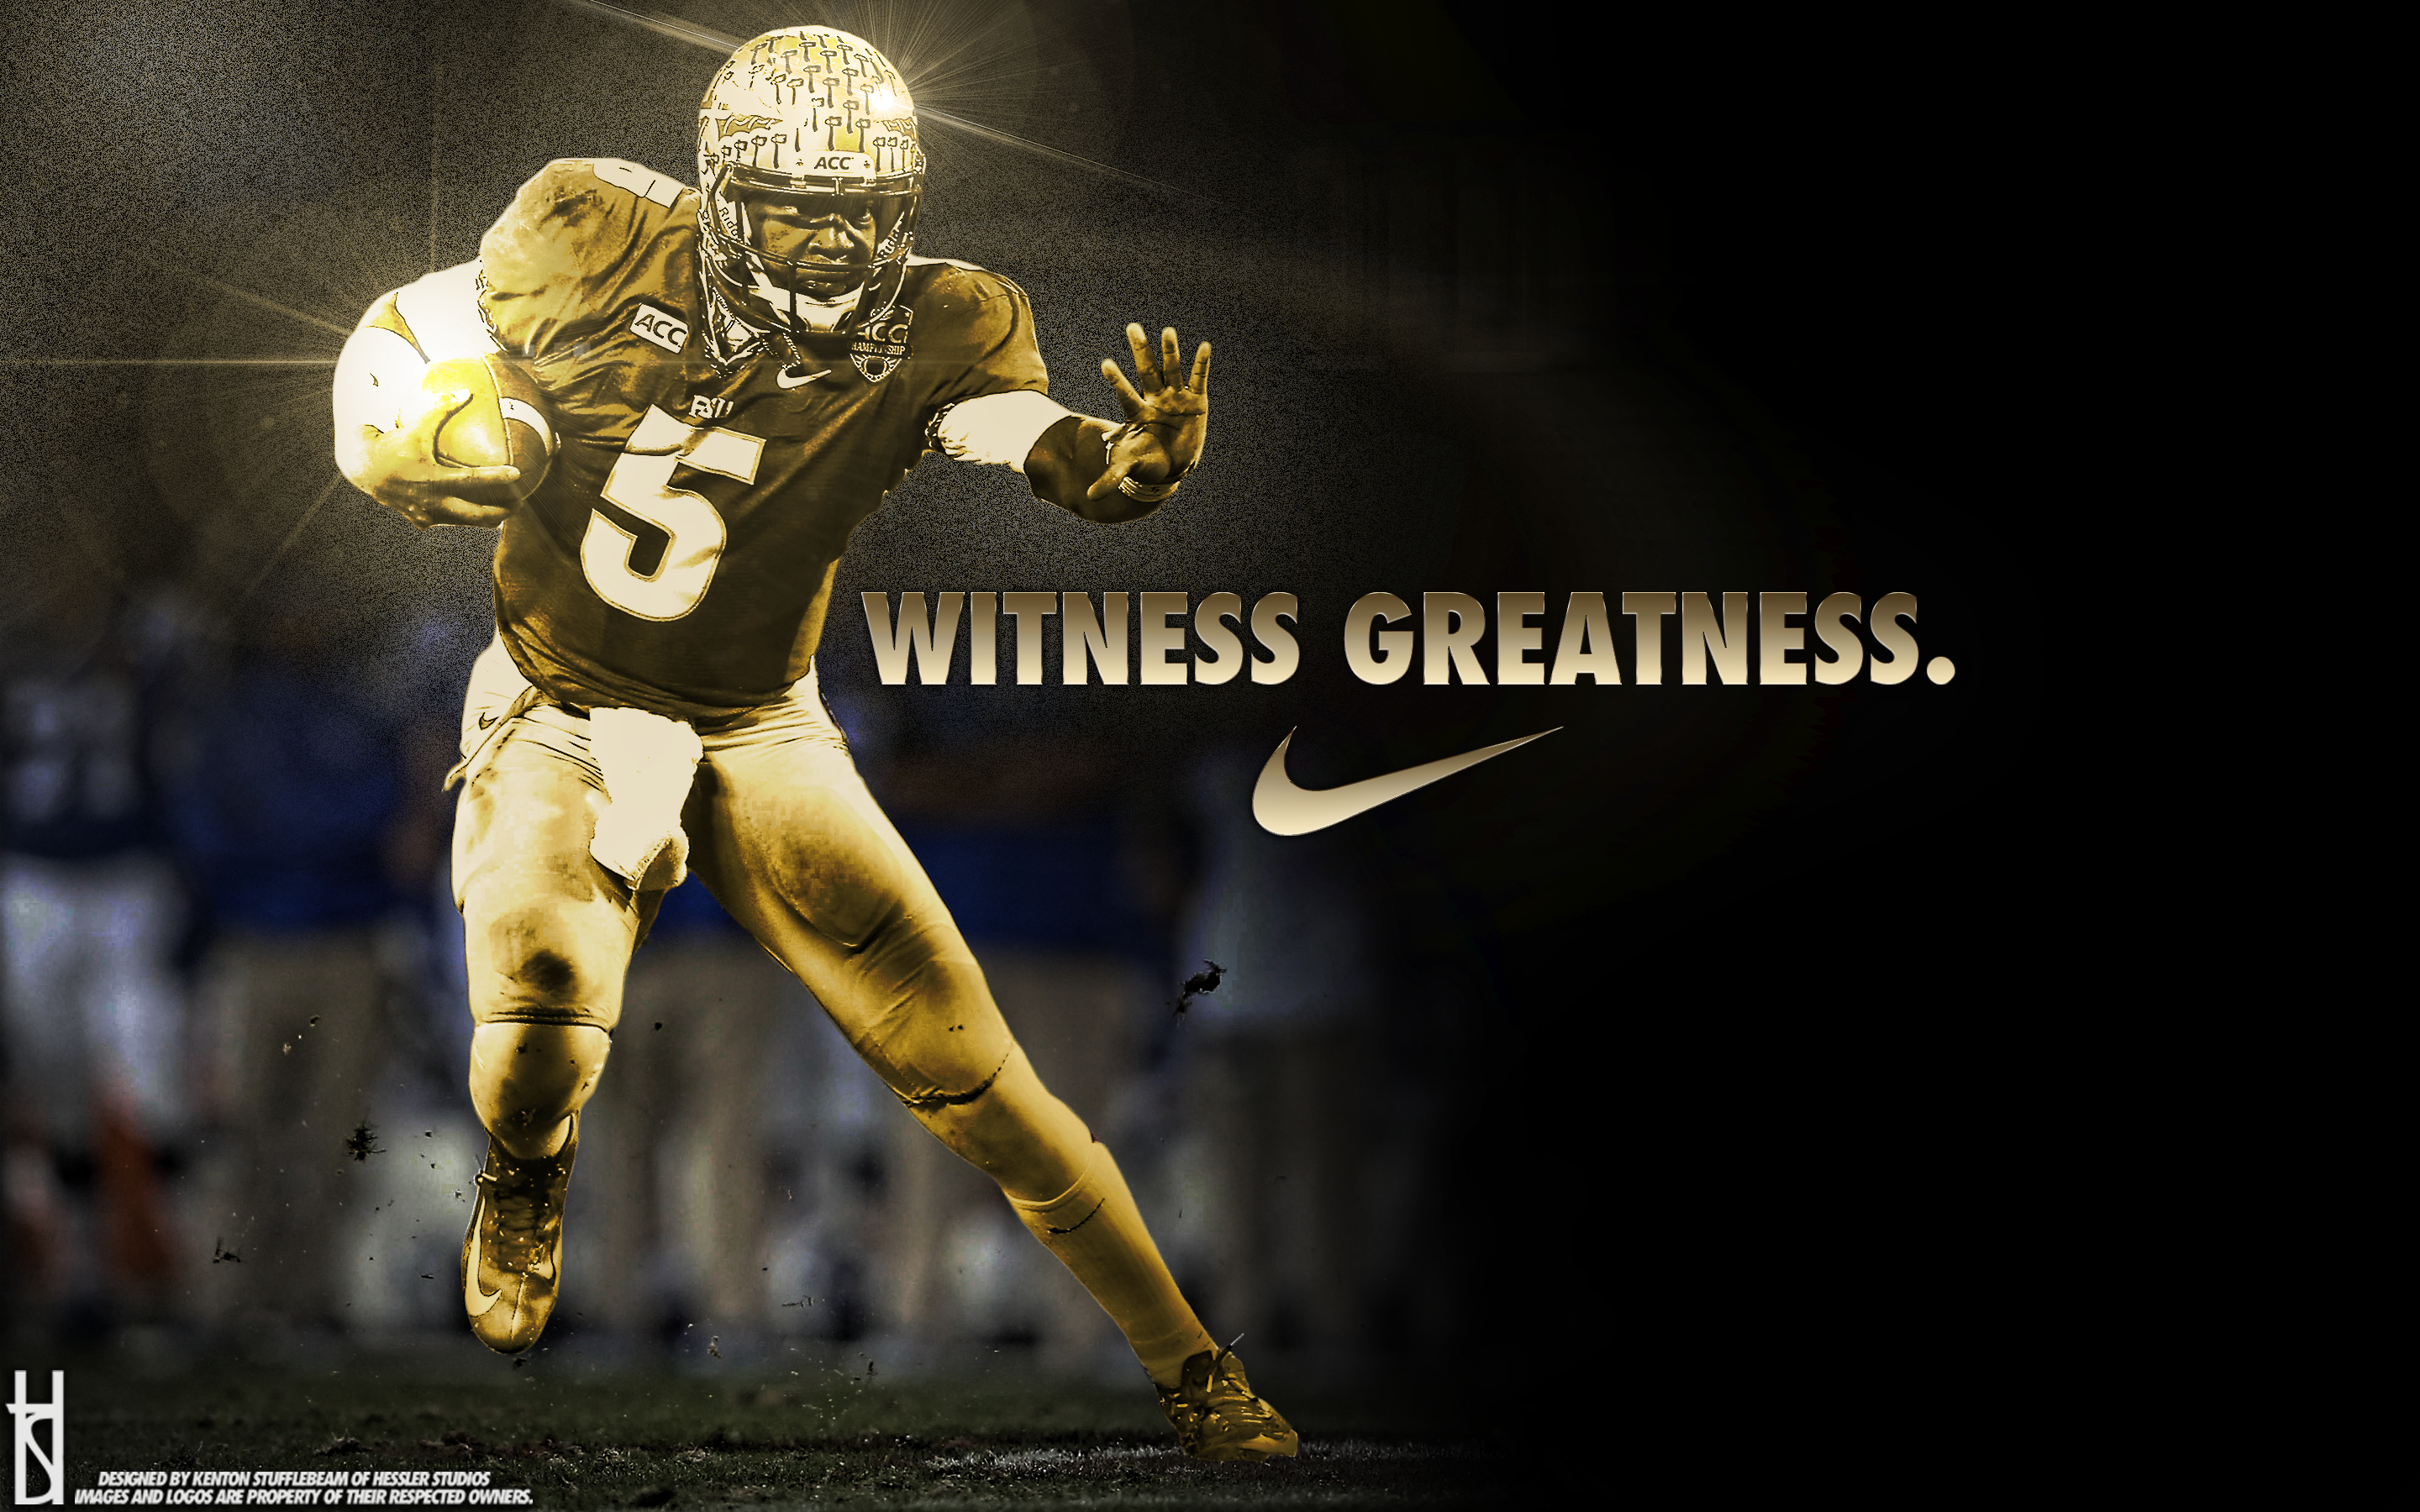 Lebron James We Are All Witnesses Poster Witness greatness   jameis